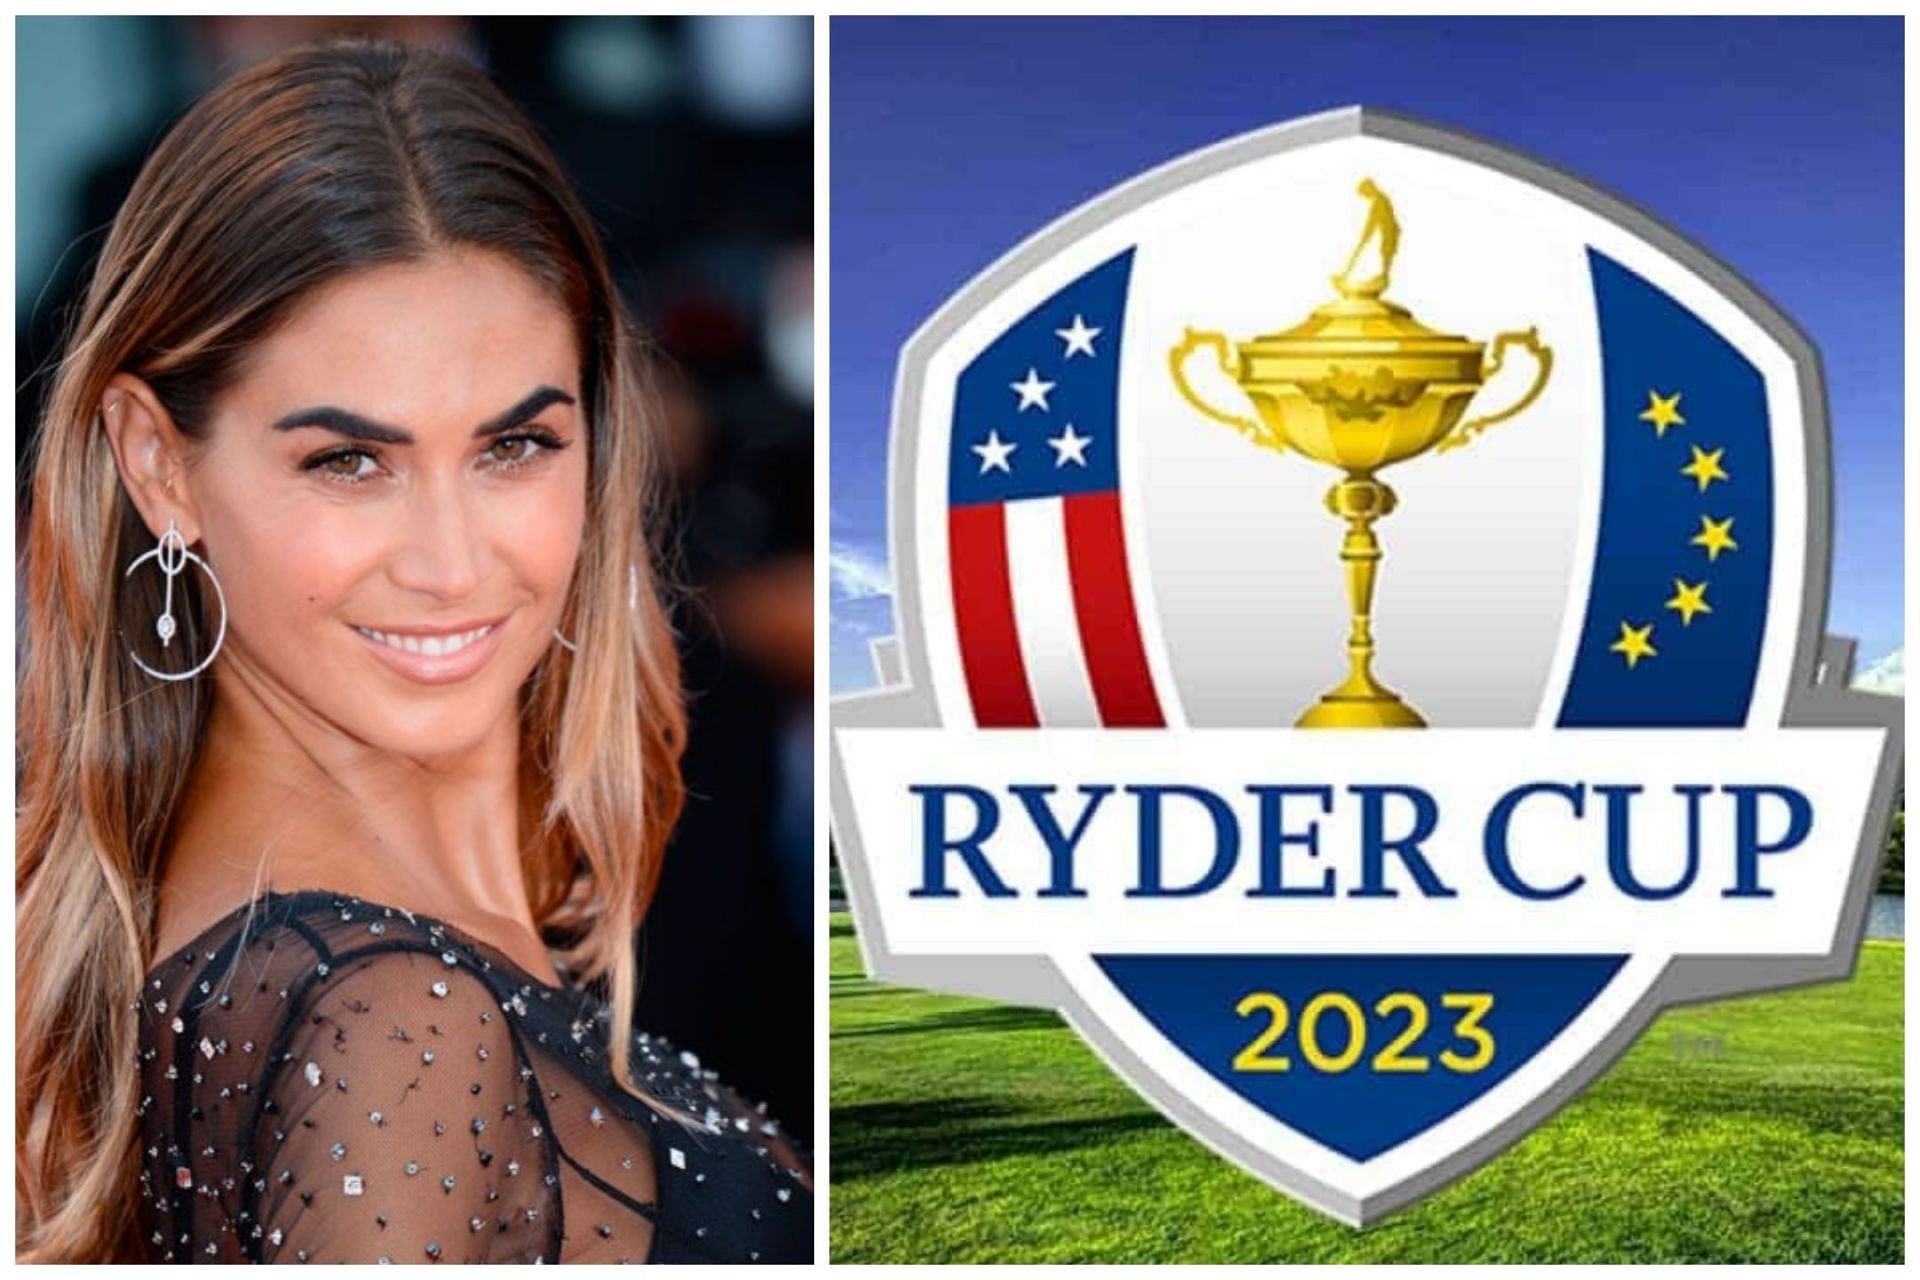 Melissa Satta will host the 2023 Ryder Cup opening ceremony